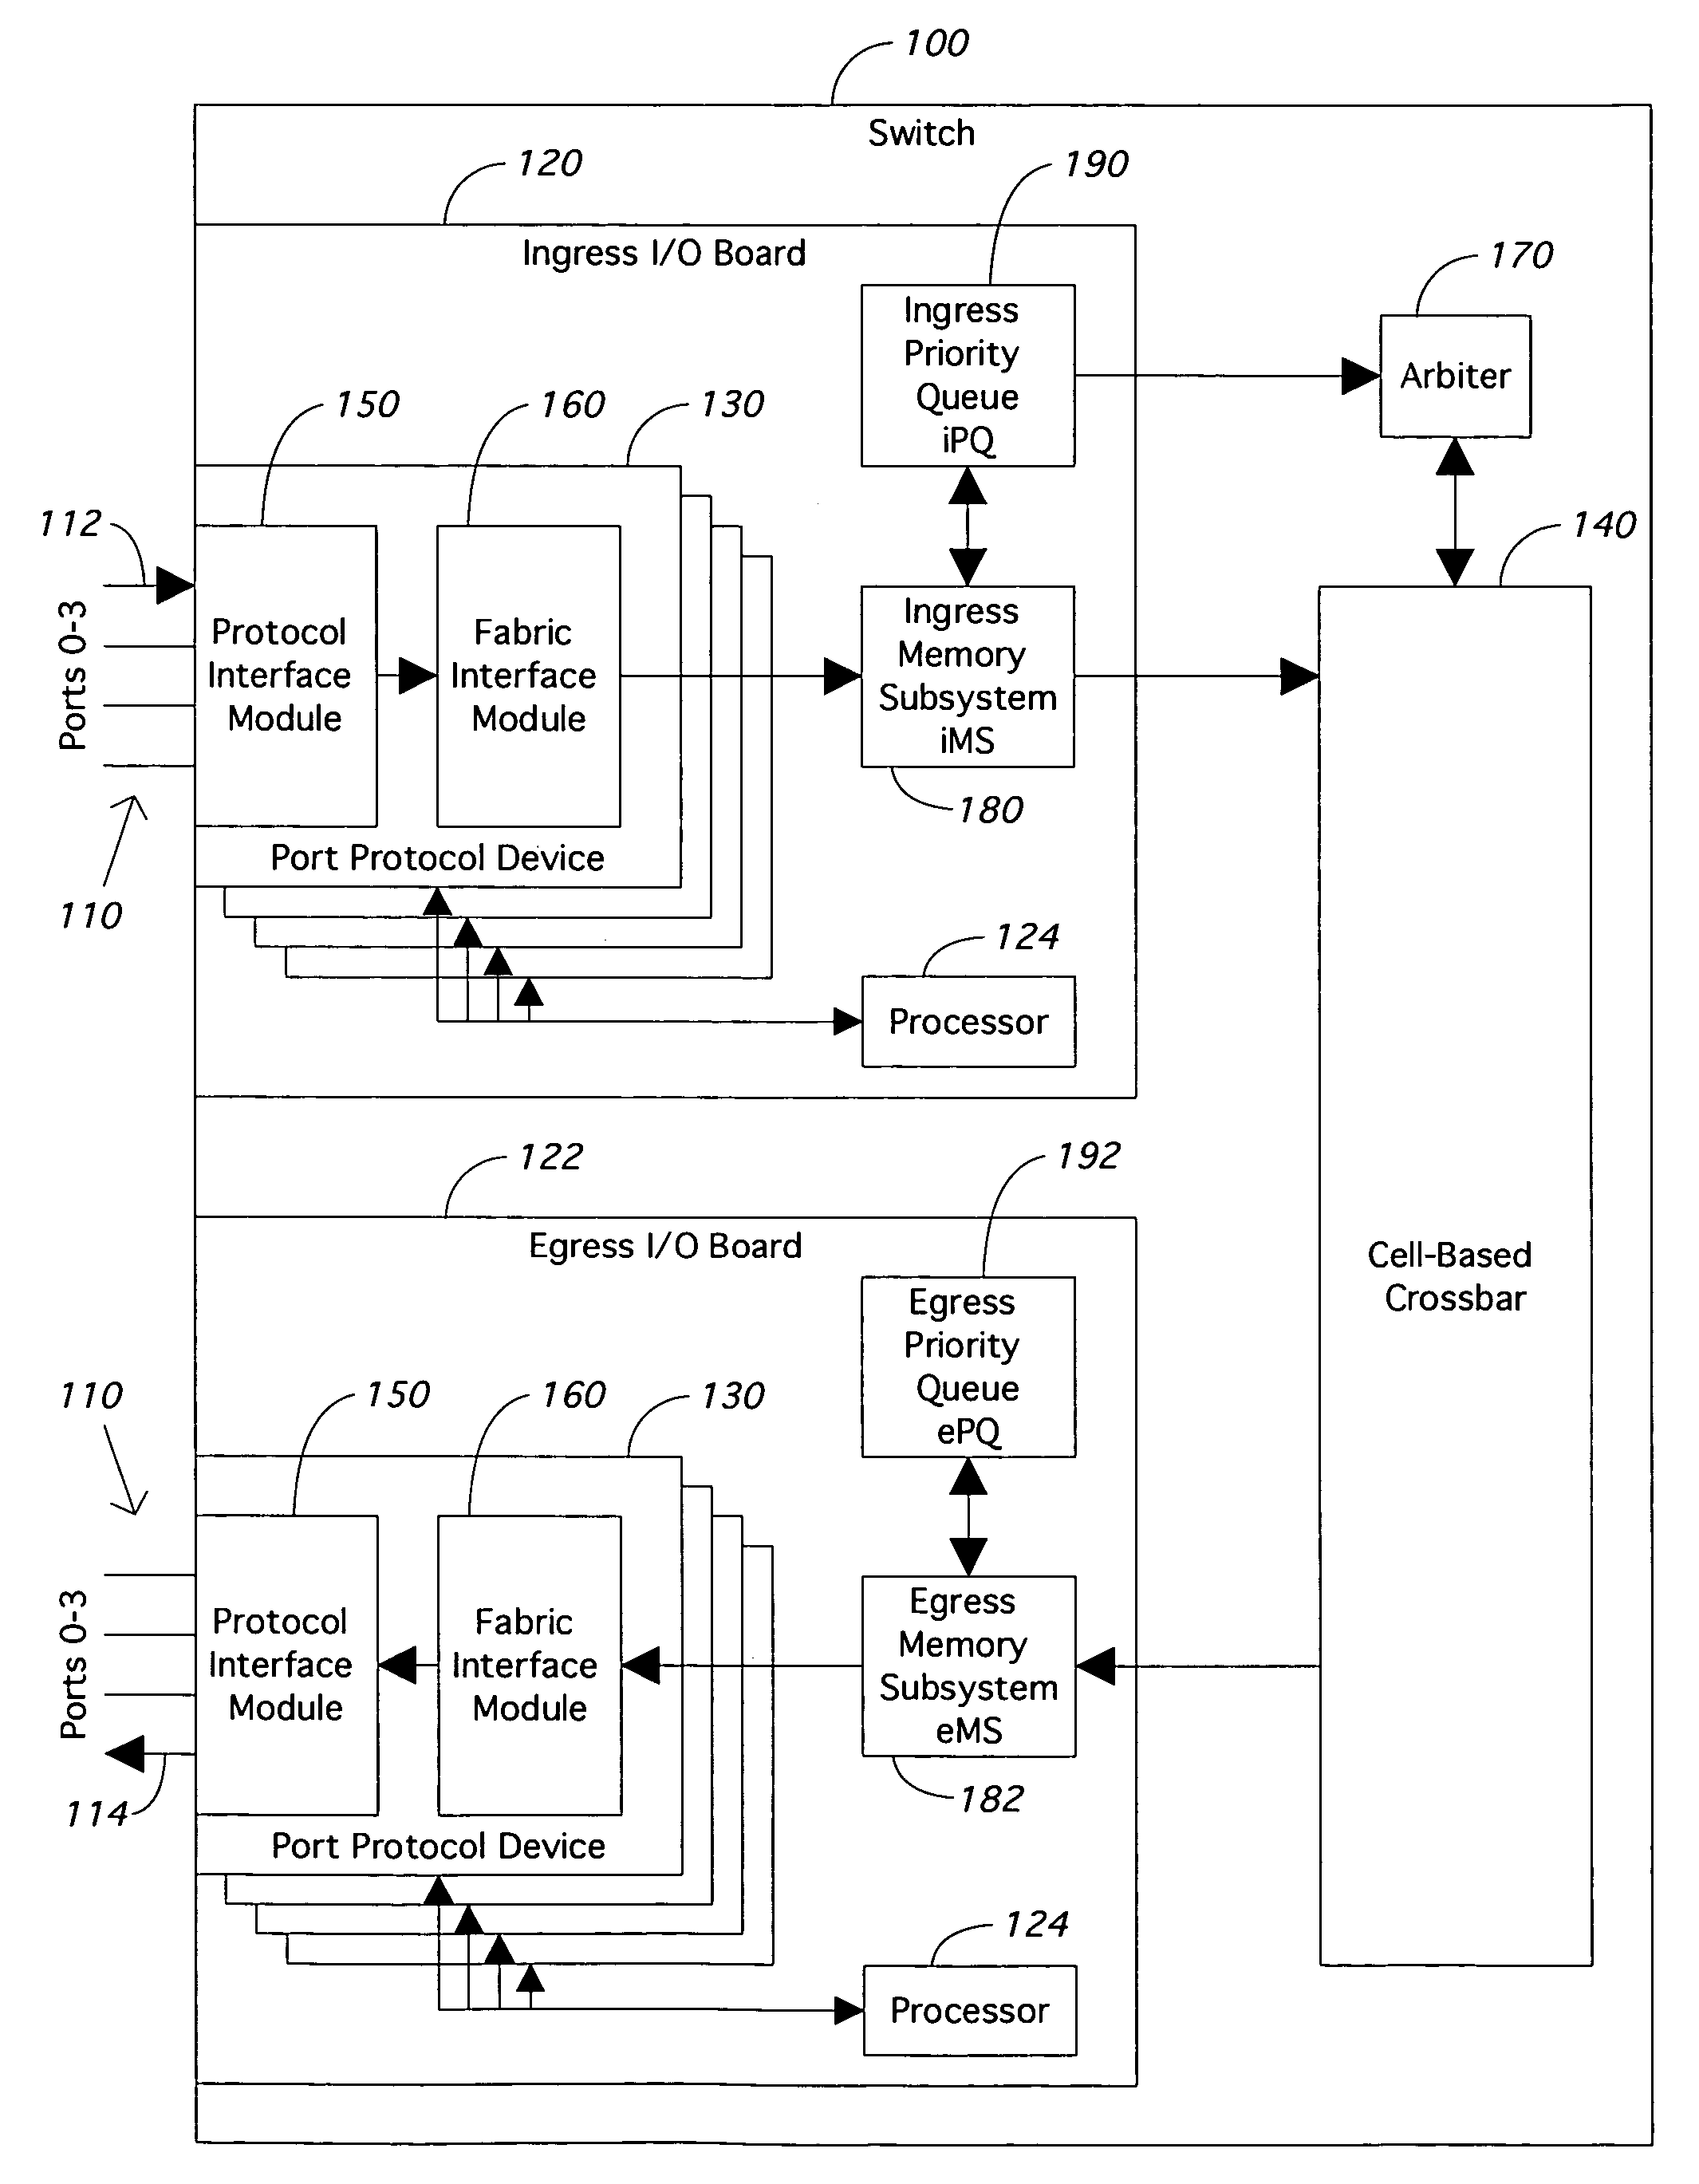 Method and apparatus for rendering a cell-based switch useful for frame based protocols